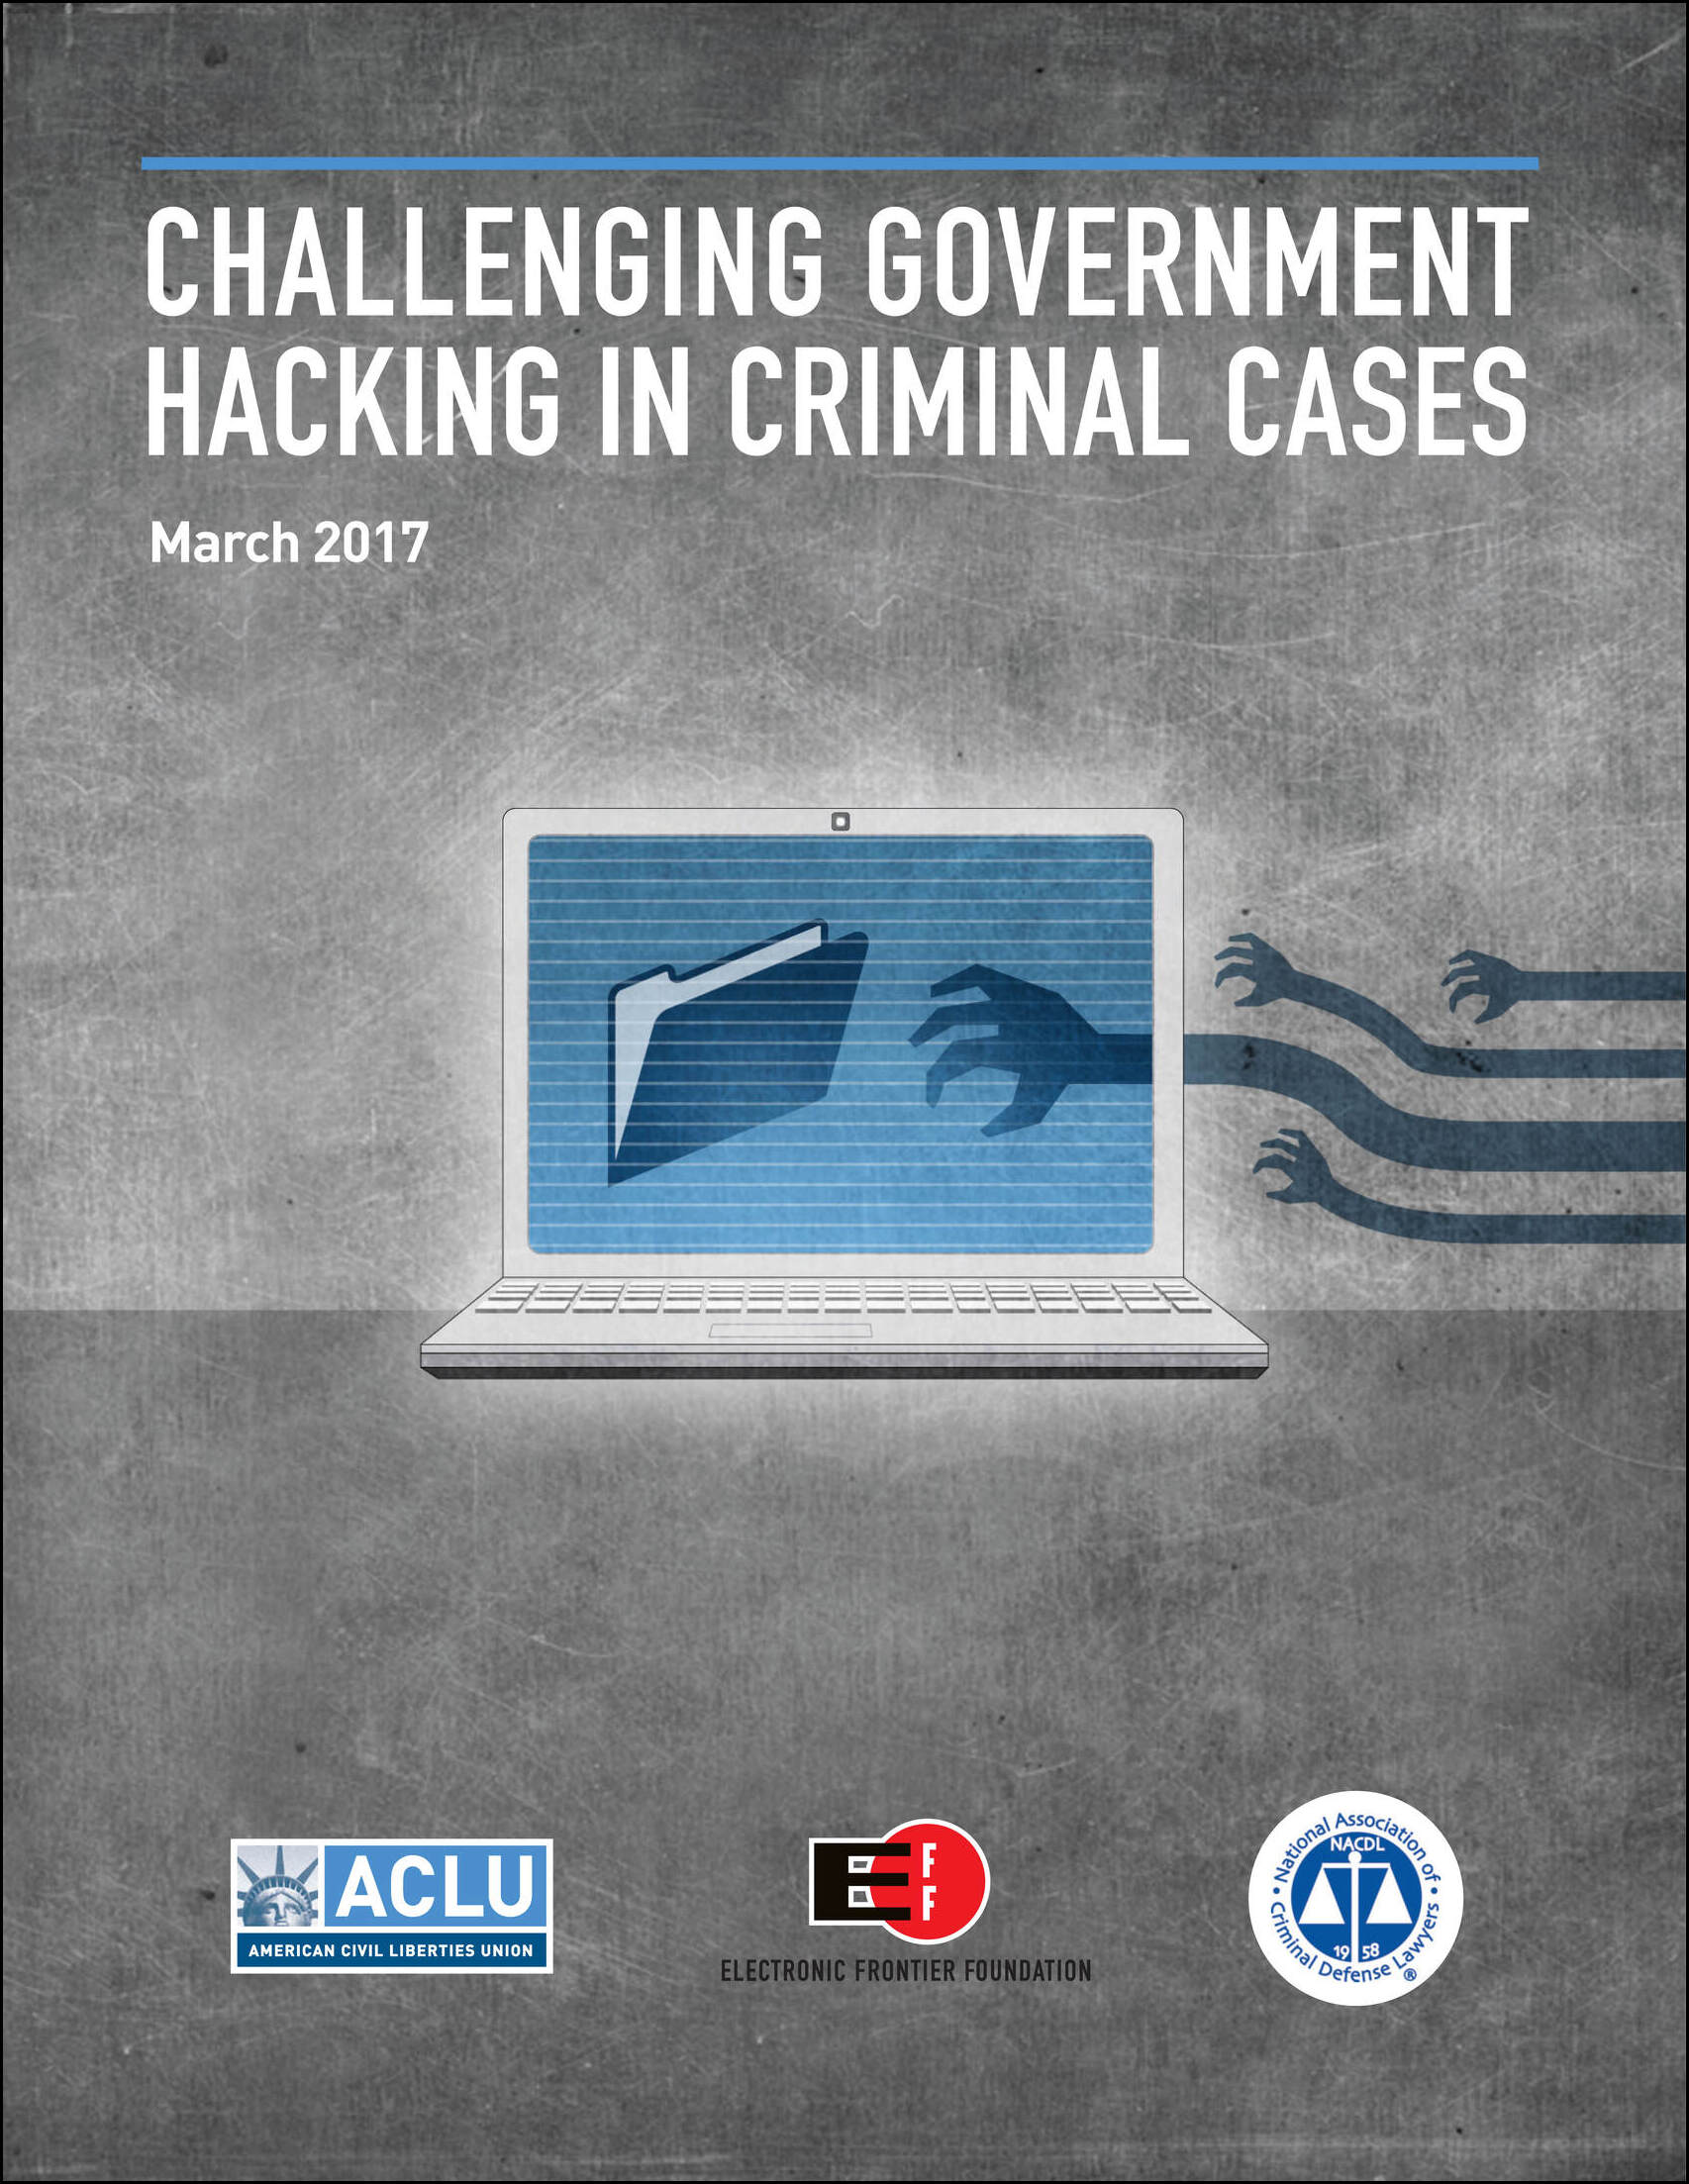 Cover for NACDL report Challenging Government Hacking in Criminal Cases